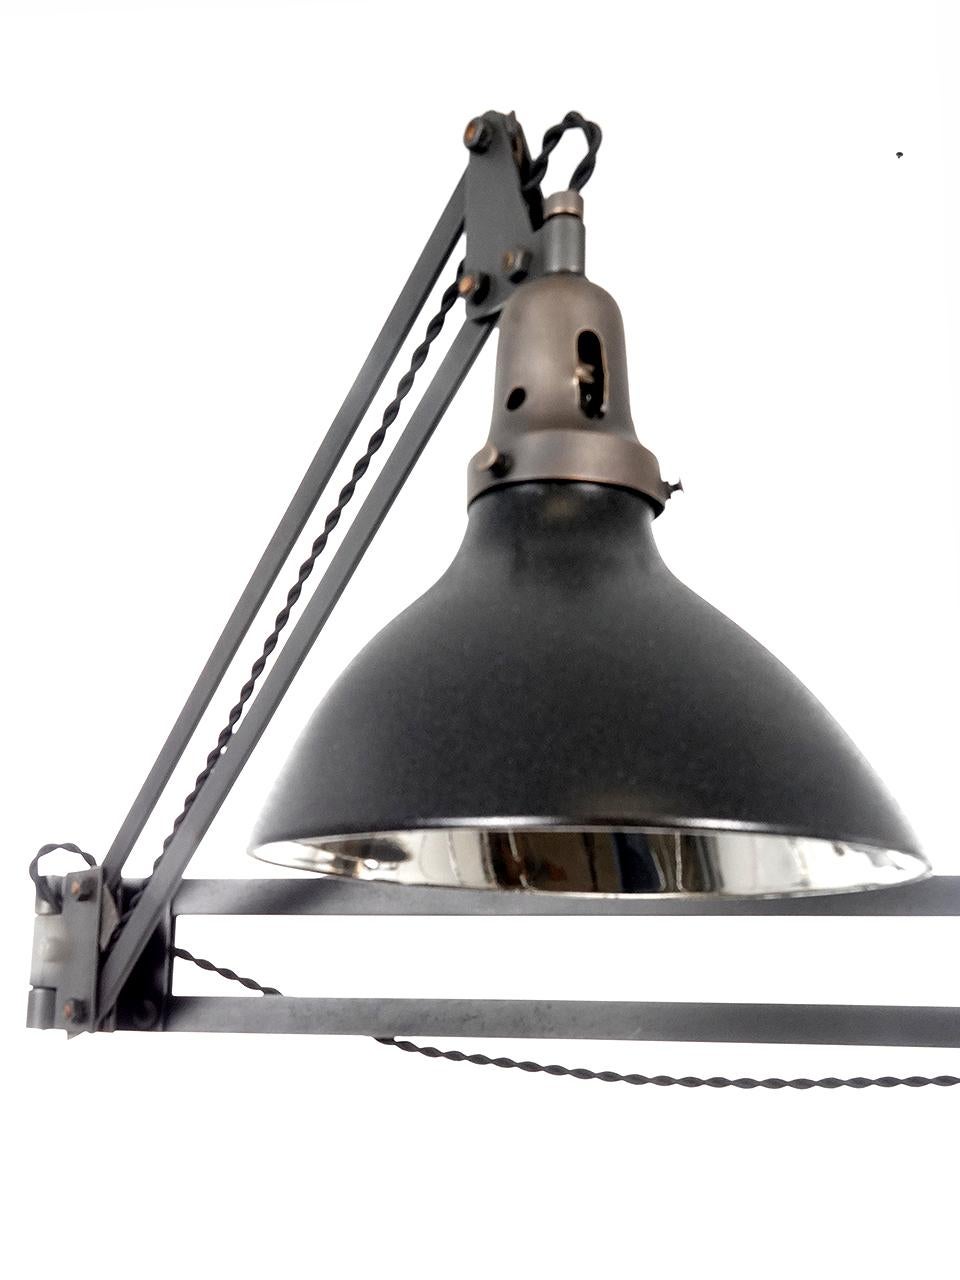 These Burton light company lamps are a rare find. They reach out 44 inches and feature a mercury glass shade. The shade is mirrored with a matte black pebbled finish outside. The patented Burton arms are well-articulated and easily move in all